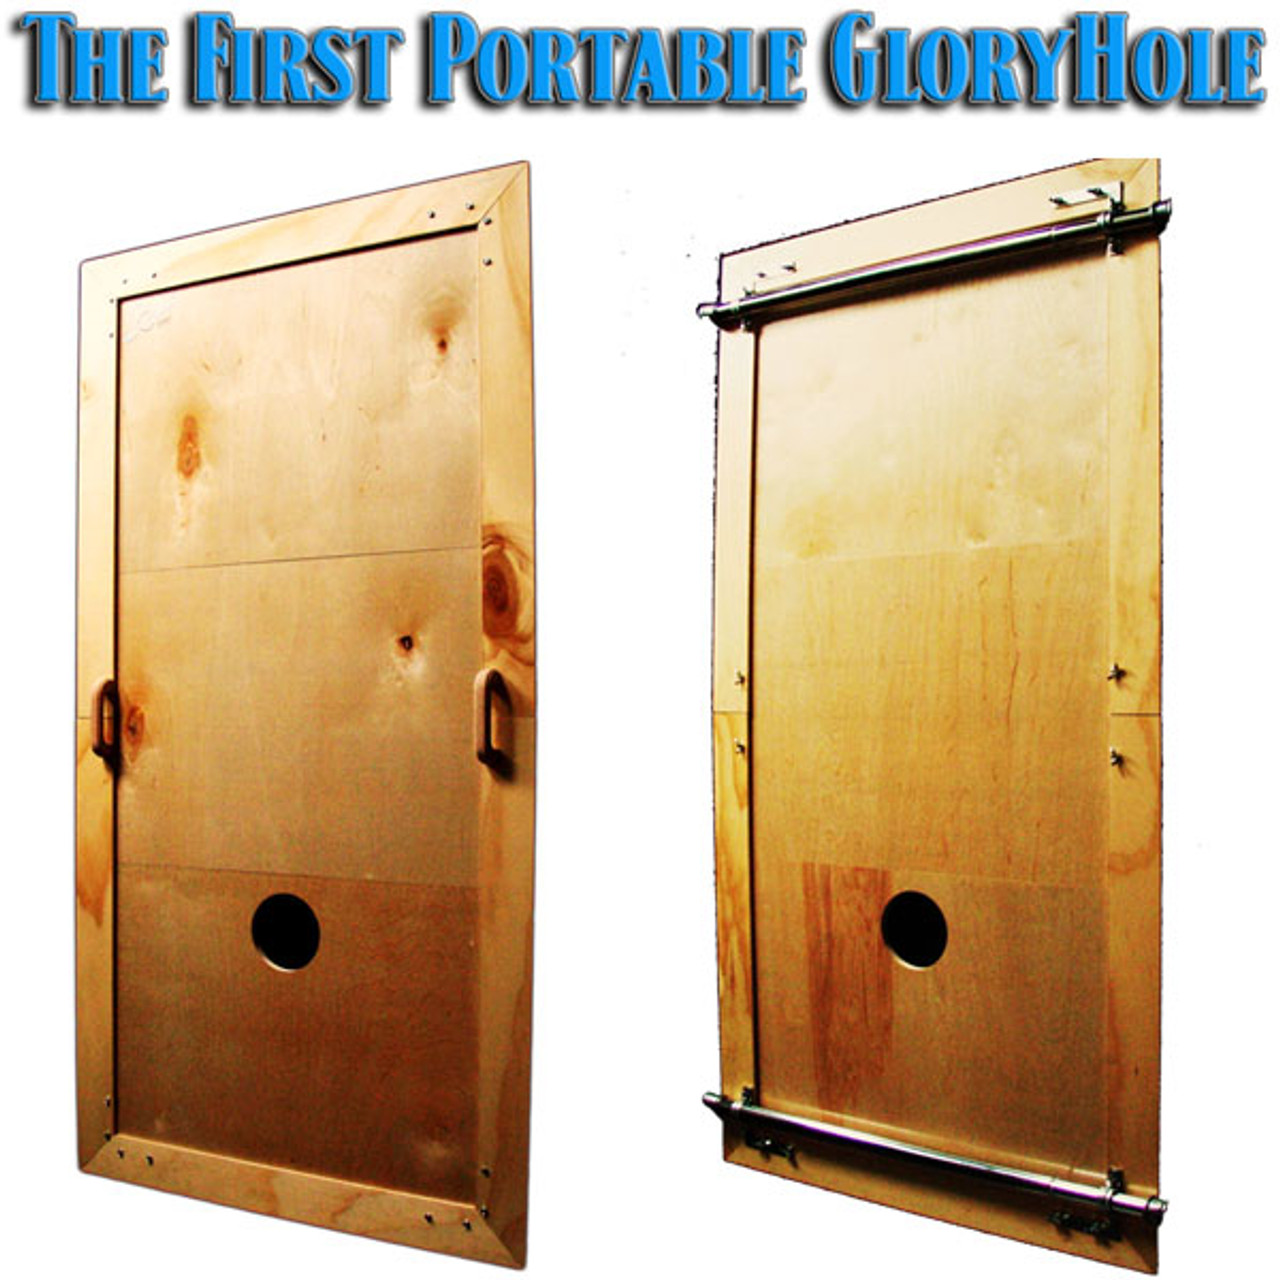 chris cleland recommends Glory Hole Portable